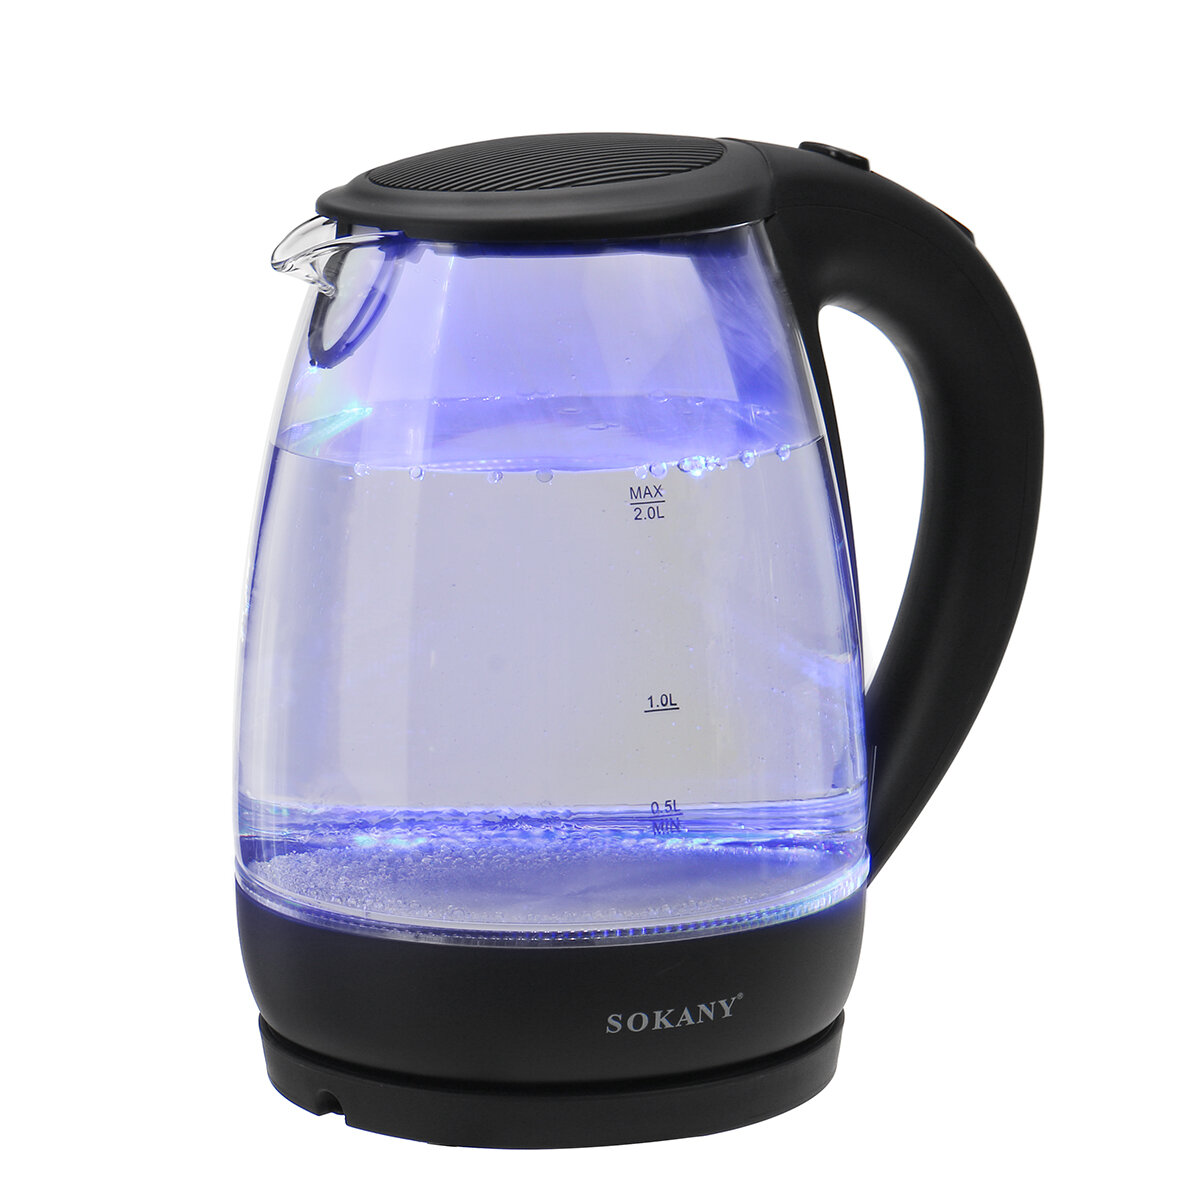 SOKANY 2000W 2L Electric Kettle Electric Tea Kettle with LED Water Kettle Glass with Fast Boil Stainless Steel Inner Lid